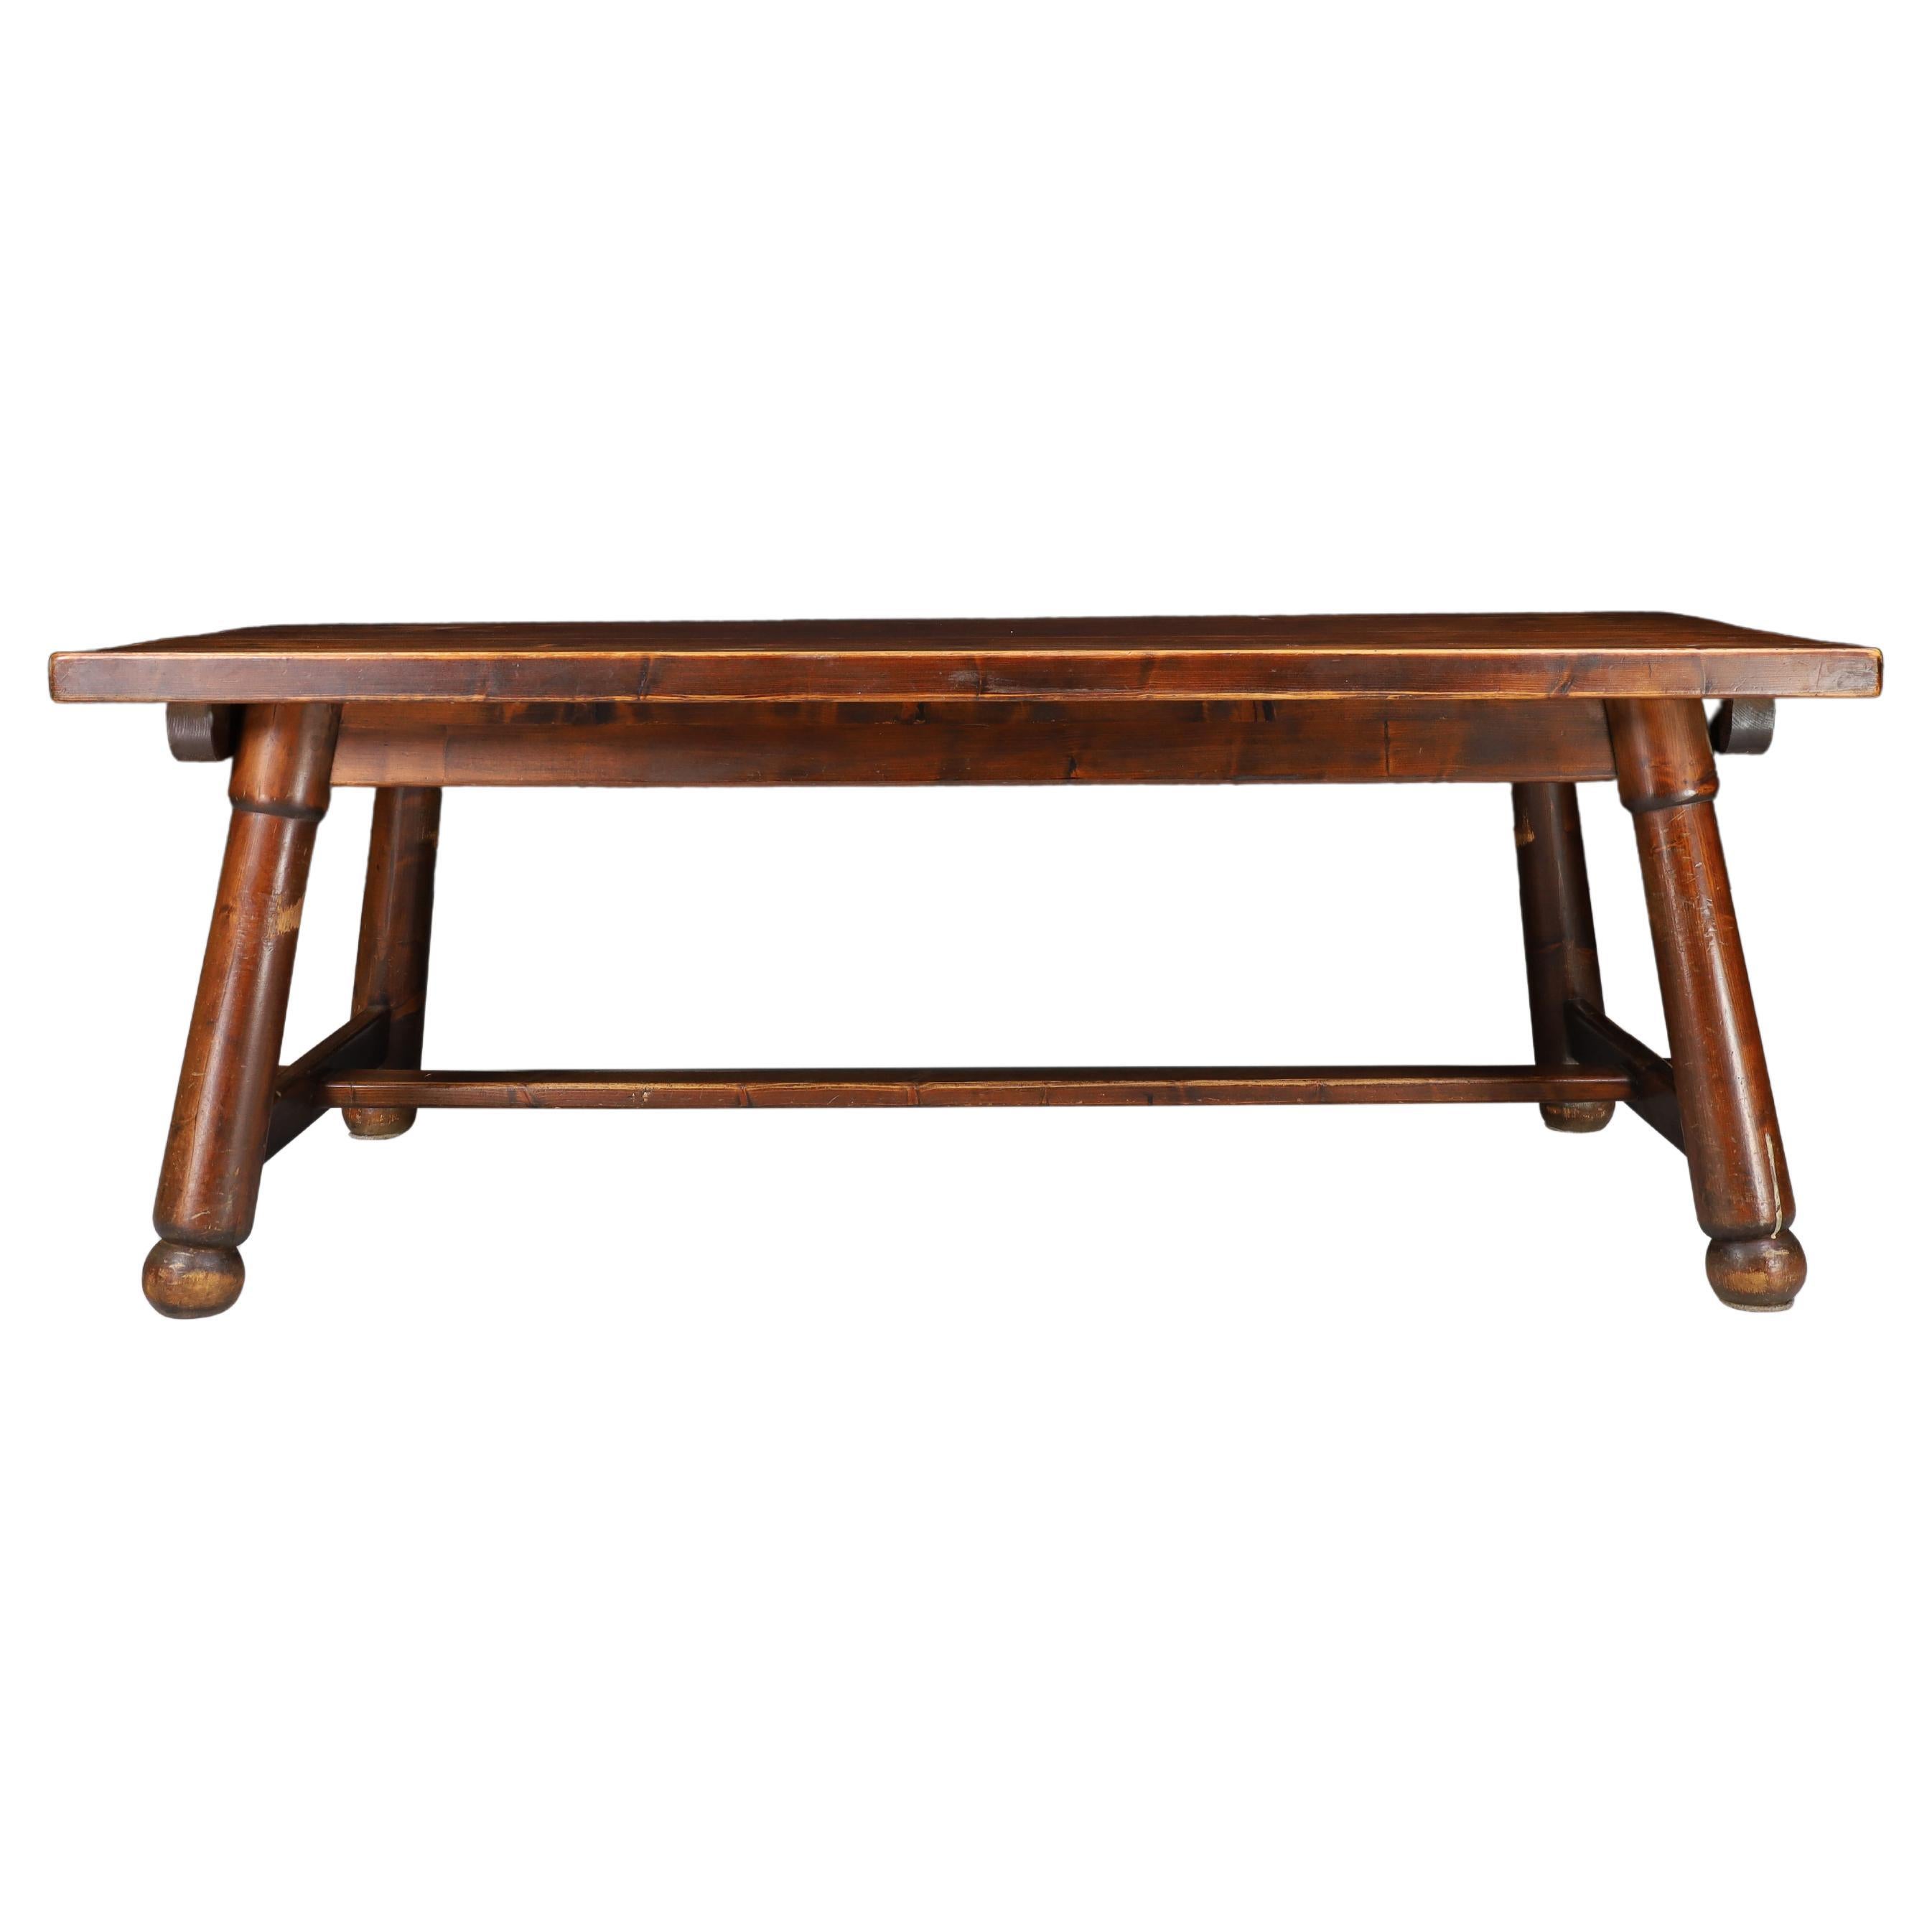 Georges Robert Solid Pine Wood Dining Room Table France 1960s For Sale